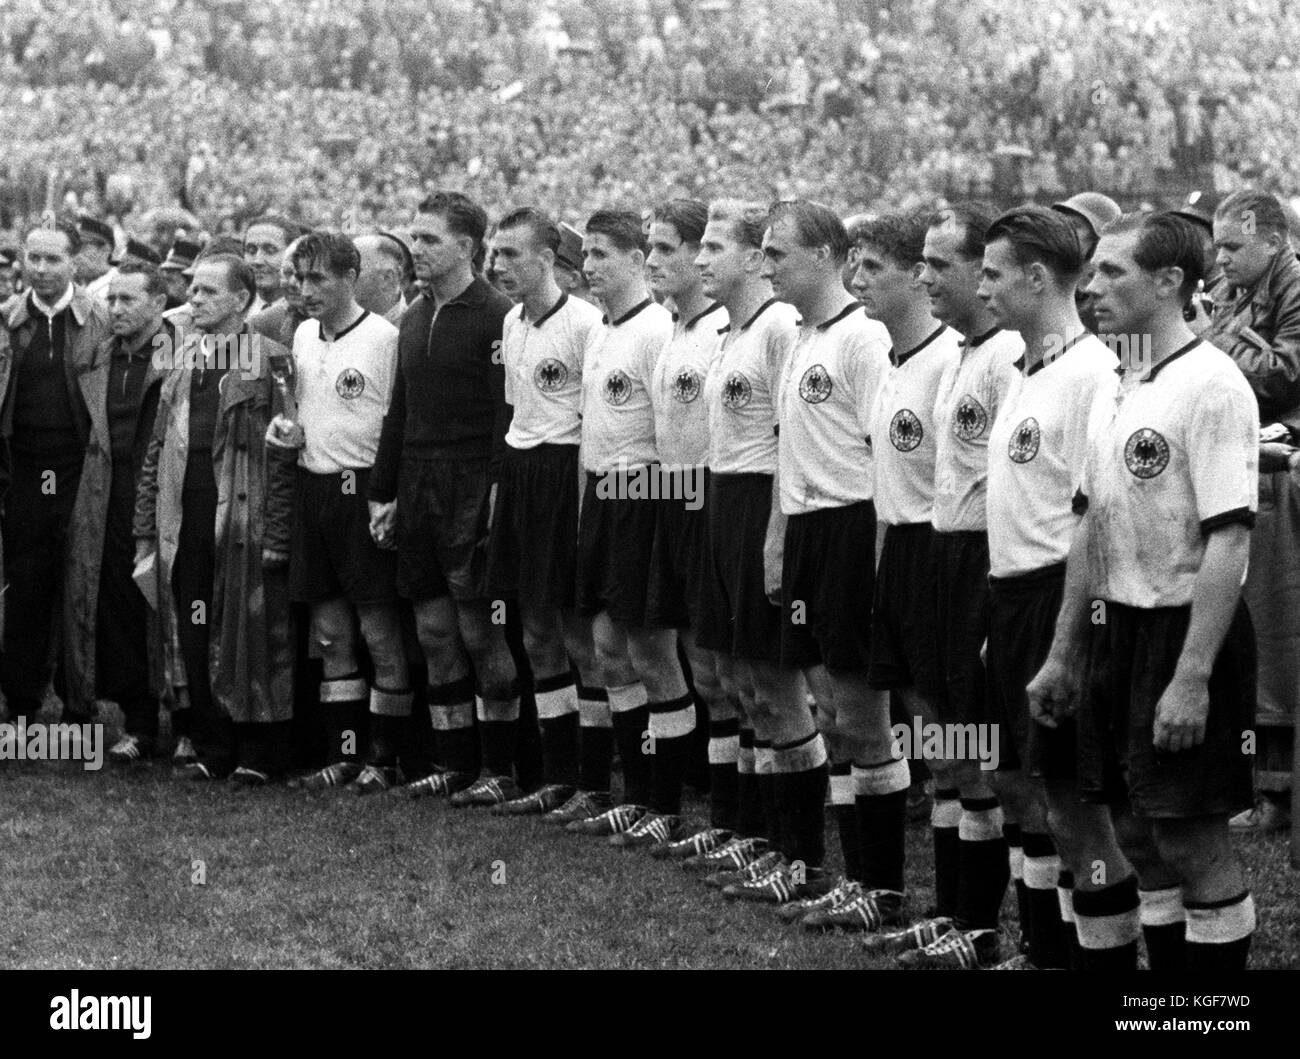 (FILE) · An archive picture, dated 4 July 1954, shows the German national  soccer team being honored in front of 53,000 espectators  after their victory of 3:2 against Hungary in the Wankdorf stadium in Bern, Switzerland. For the winning ceremony they pose: (M-R)Trainer Sepp Herberger, captain Fritz Walter holding the conquered Jules-Rimet-Cup, goal keeper Toni Turek, Horst Eckel, Helmut Rahn, Ottmar Walter, Werner Liebrich, Jupp Posipal, Hans Schaefer, Werner Kohlmeyer, Karl Mai and Max Morlock. Standing left to Herberger are Adolf Dassler (L)and the masseur Erich Deuser(2-L). The soccer Worl Stock Photo